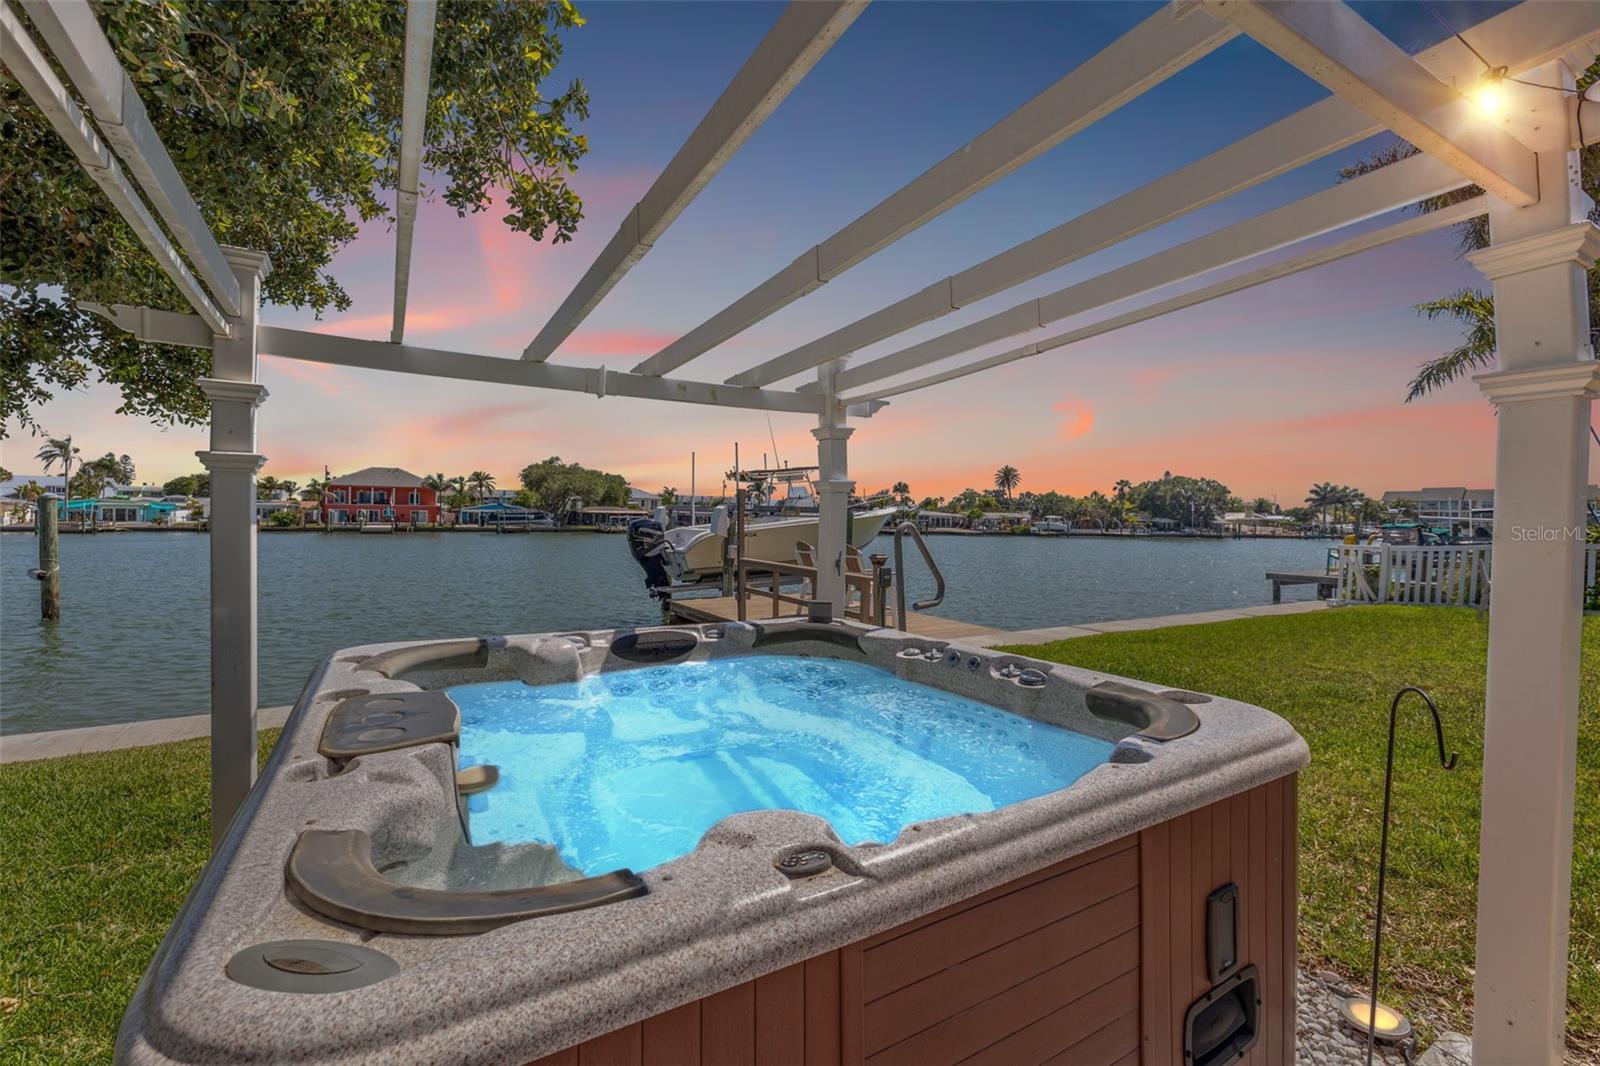 Relax in a hot tub while watching the sunset!